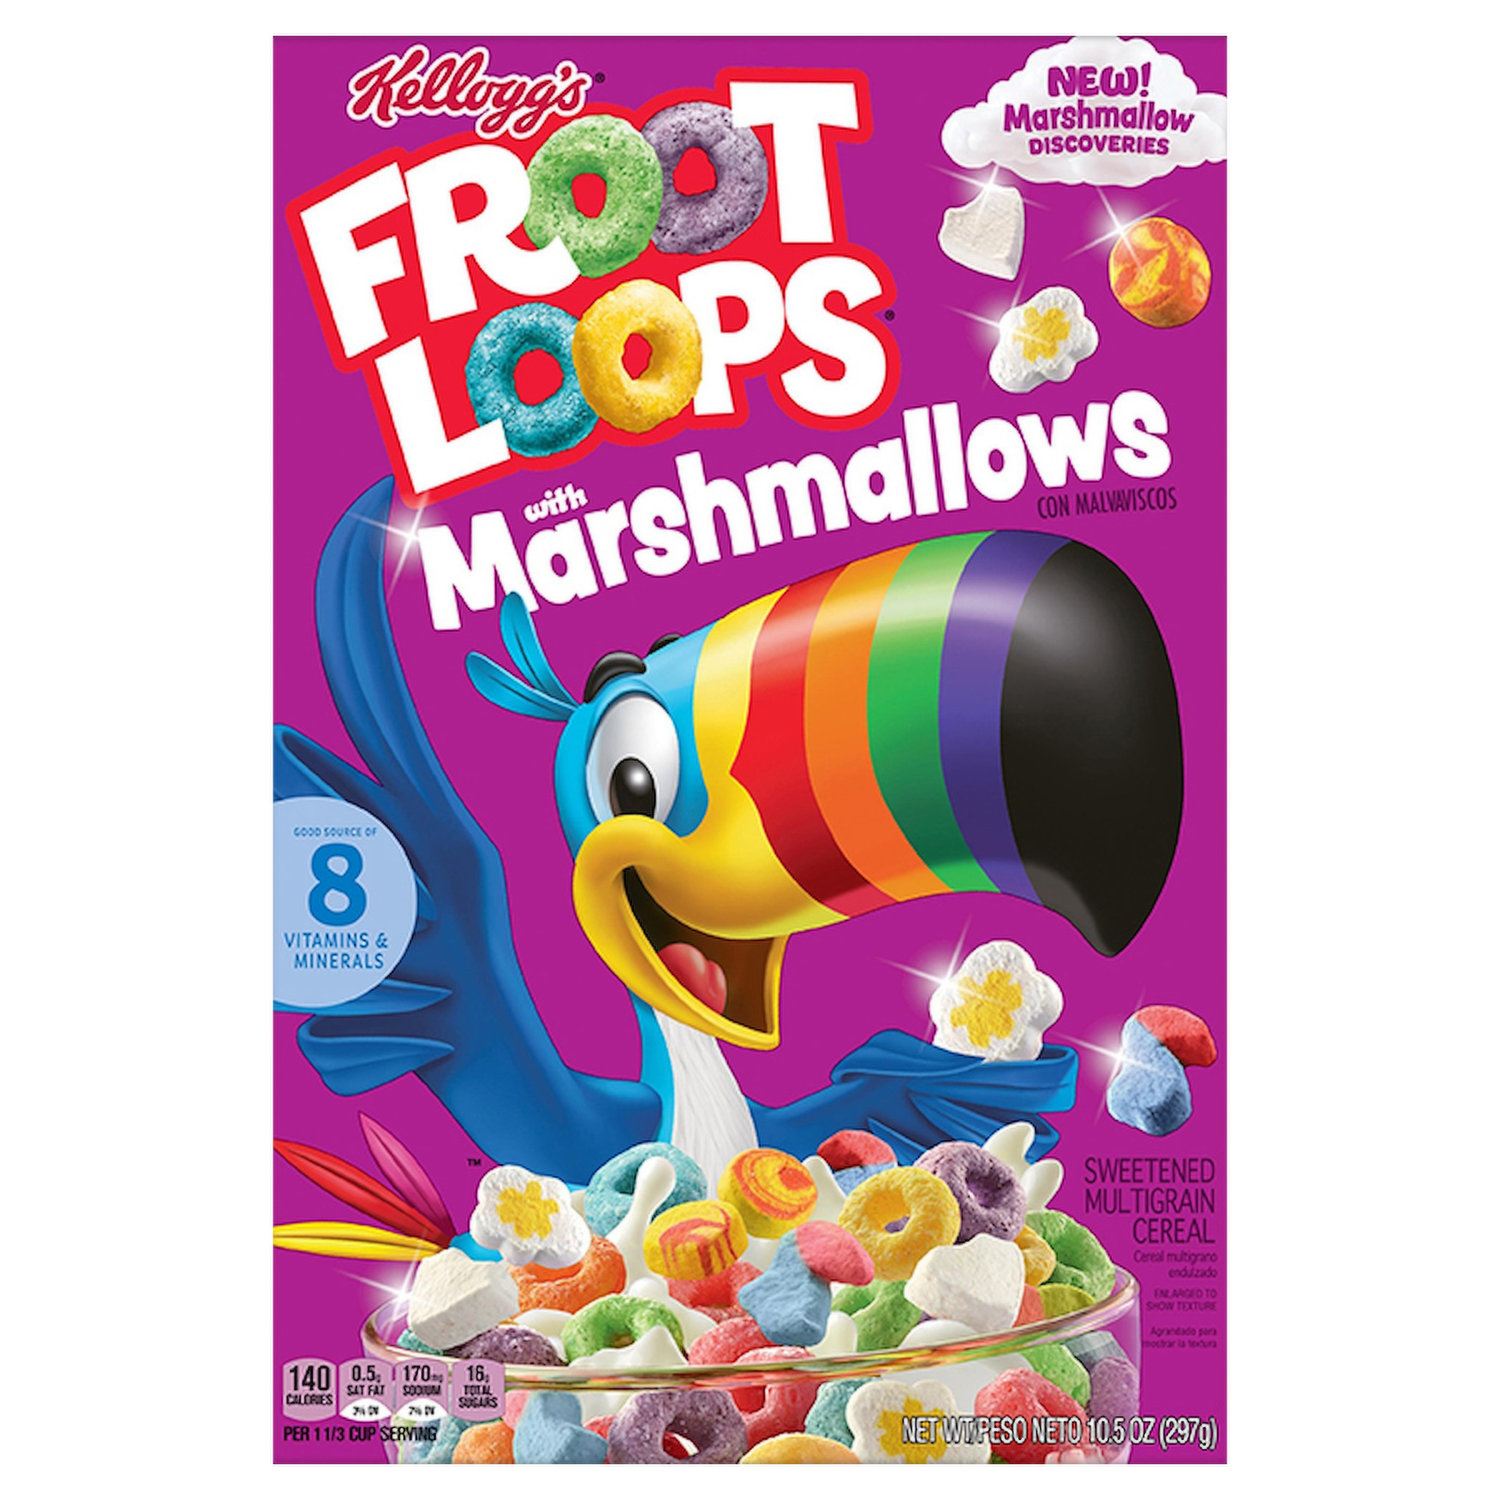 Kellogg's® Froot Loops Cereal Cups, 4 ct / 1.5 oz - Pay Less Super